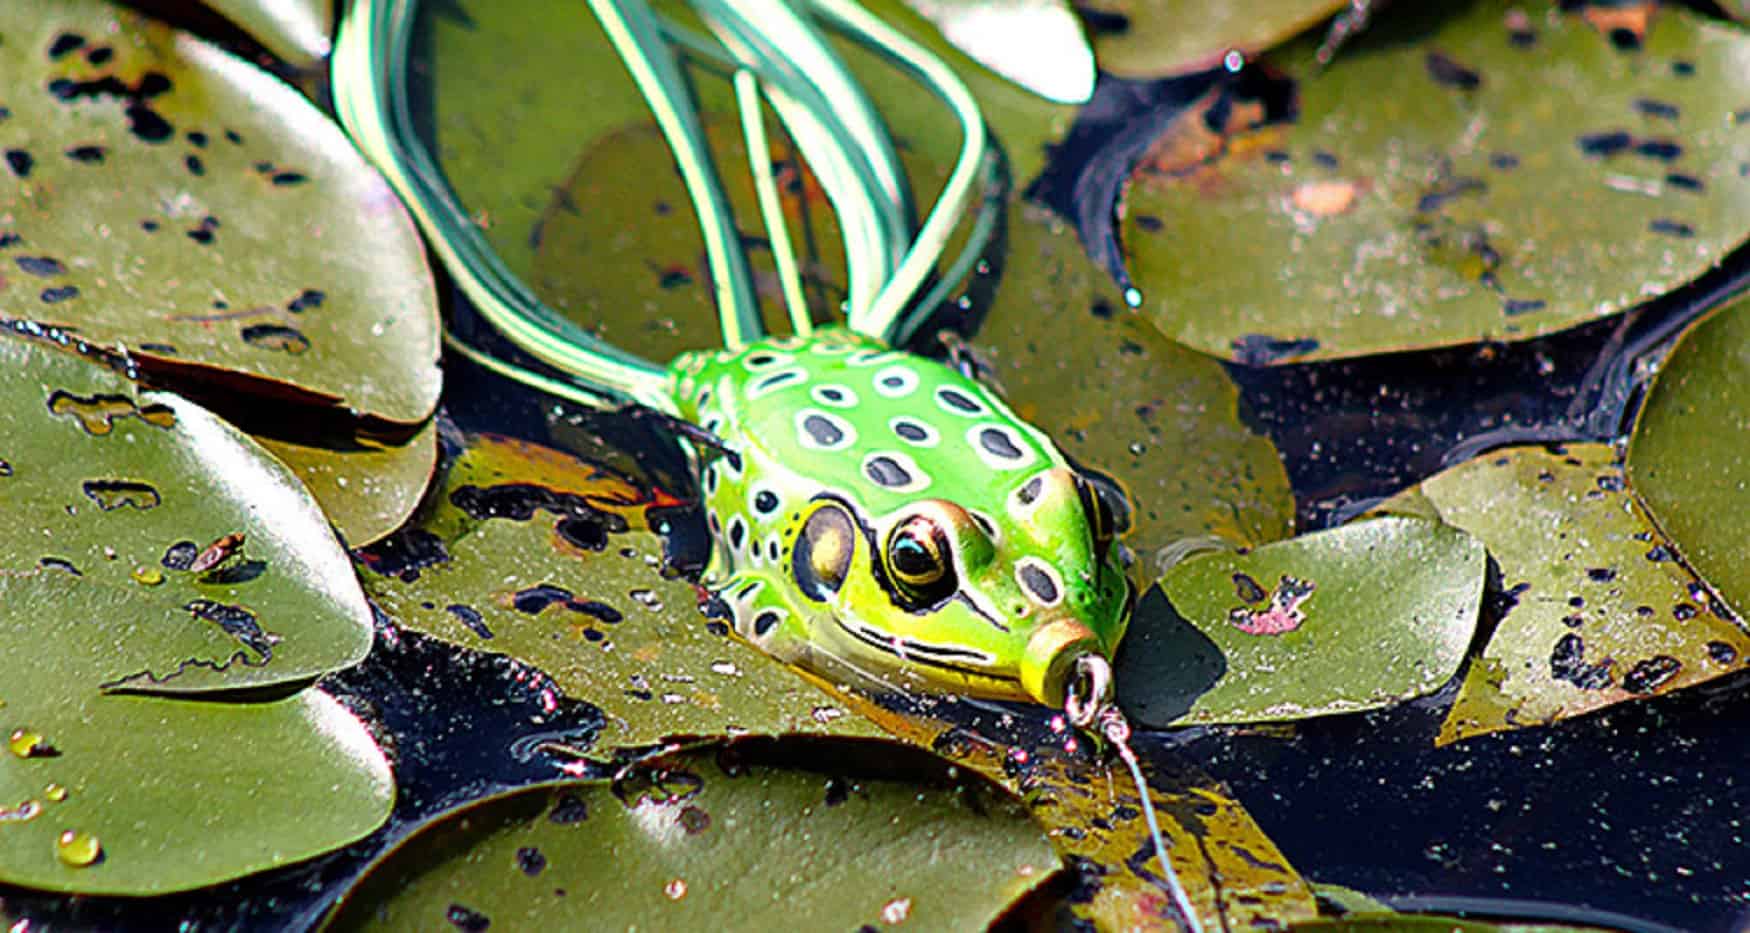 4 Steps On Frog Fishing For Bass That You Need To Know